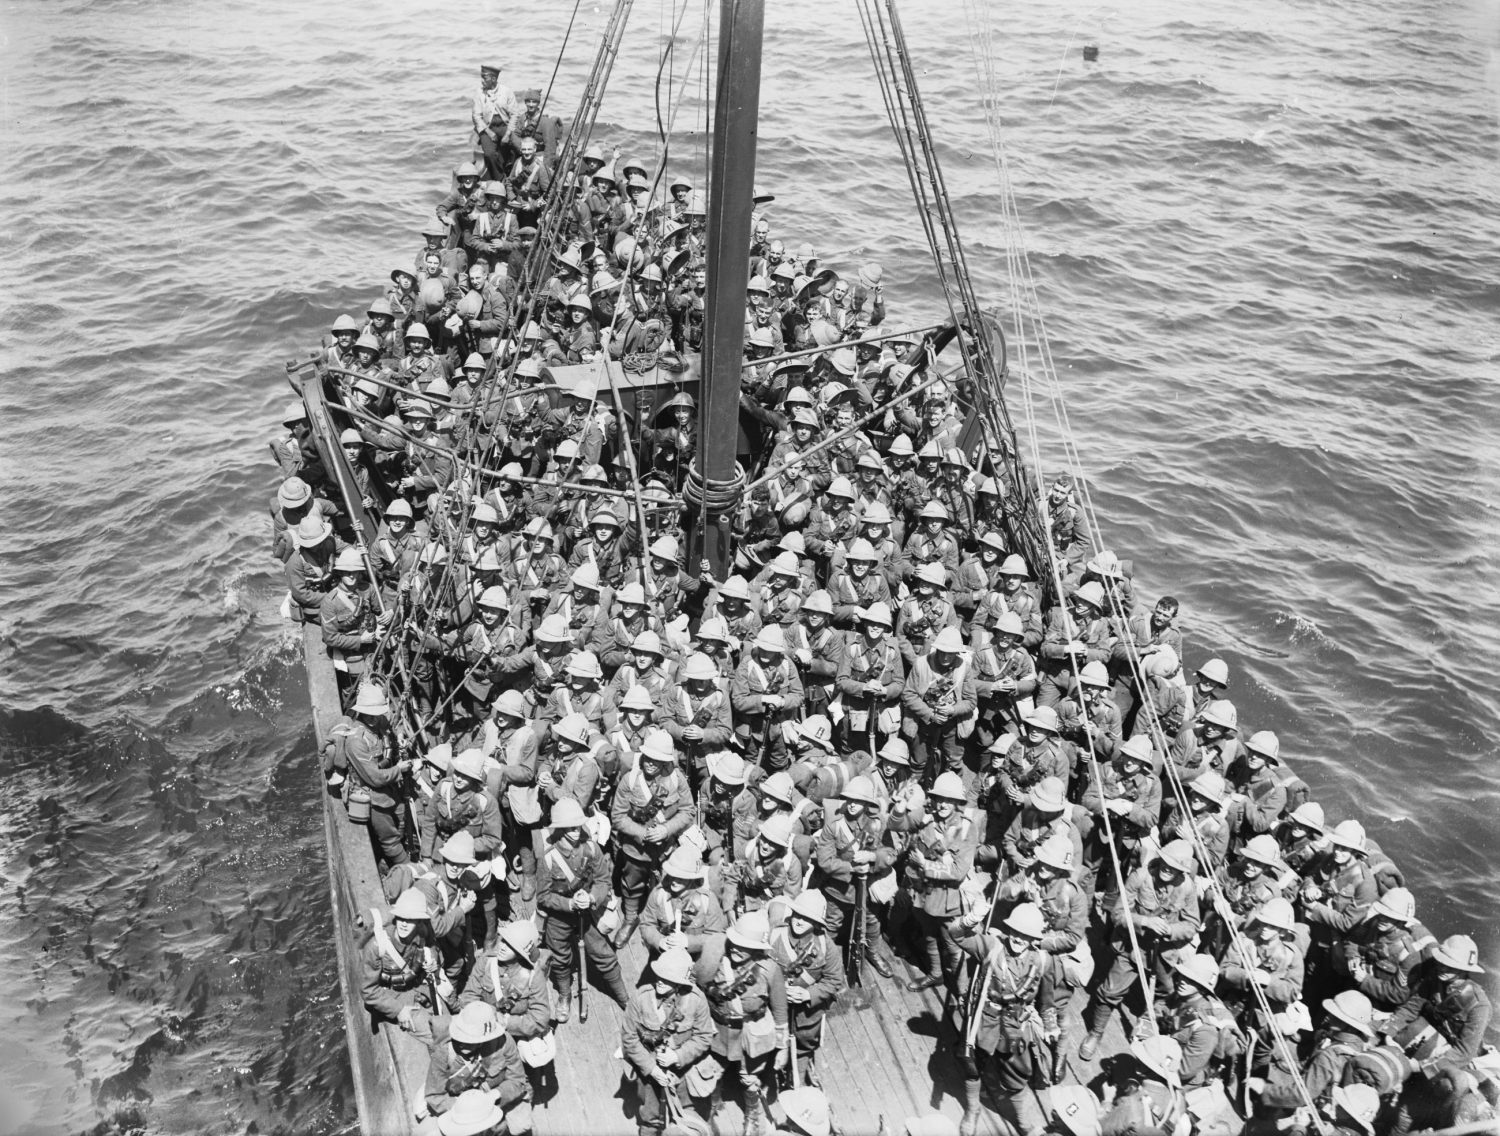 Soldiers of the Lancashire Fusiliers, 29th Division, are seen on board an old Royal Navy battleship used in the third phase of operations in the Dardanelles Straits before they disembarked at ‘W’ and ‘V’ beaches off Cape Helles on 5 May 1915